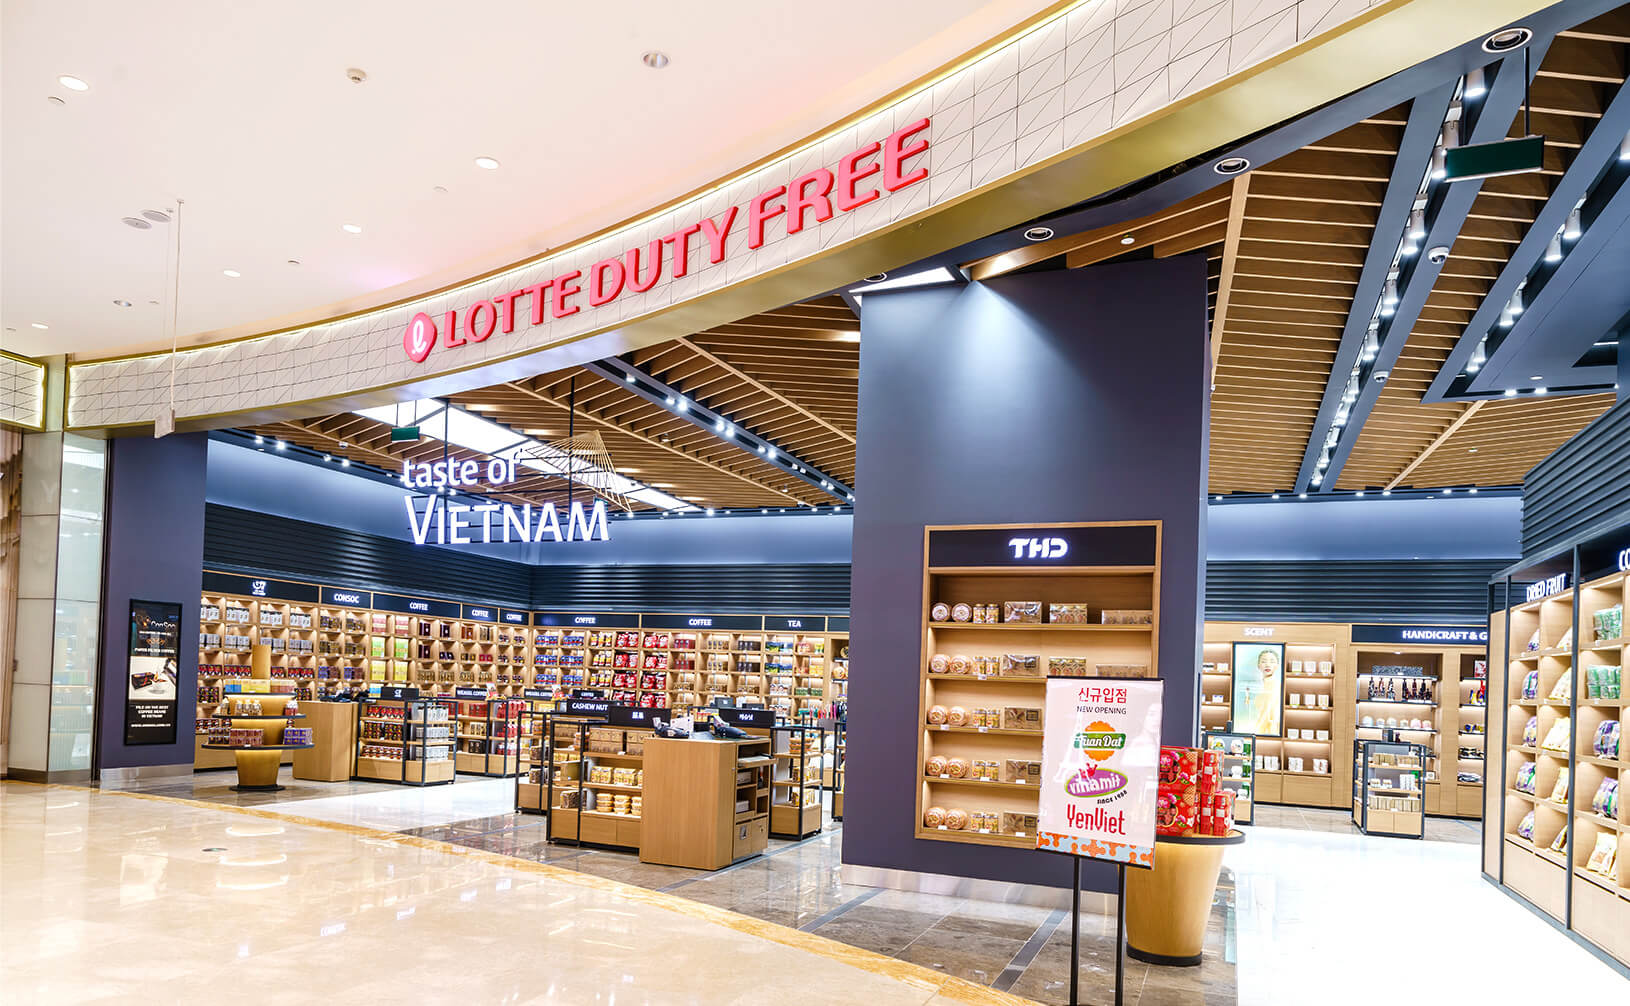 New routes create retail prospects in APAC's evolving air travel industry